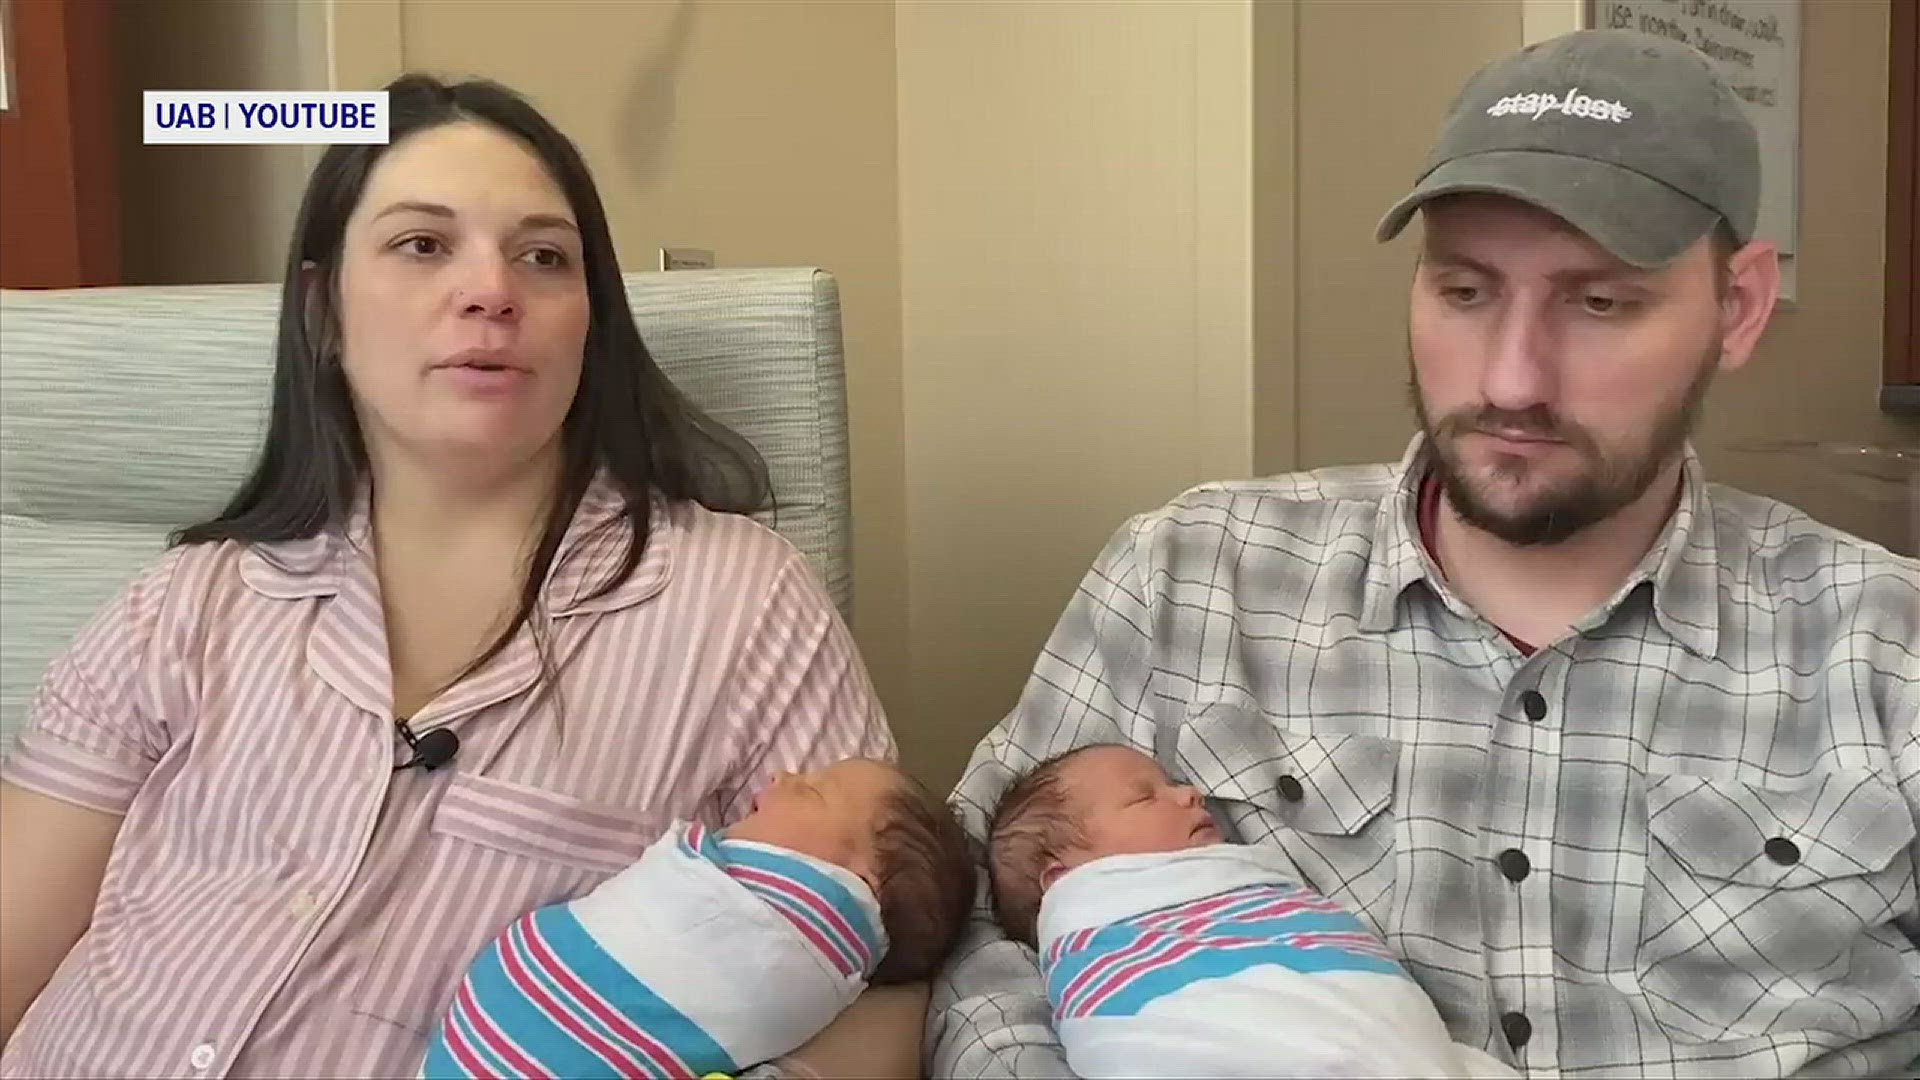 The twins were born after more than 20 hours of total labor at UAB Hospital in Birmingham.